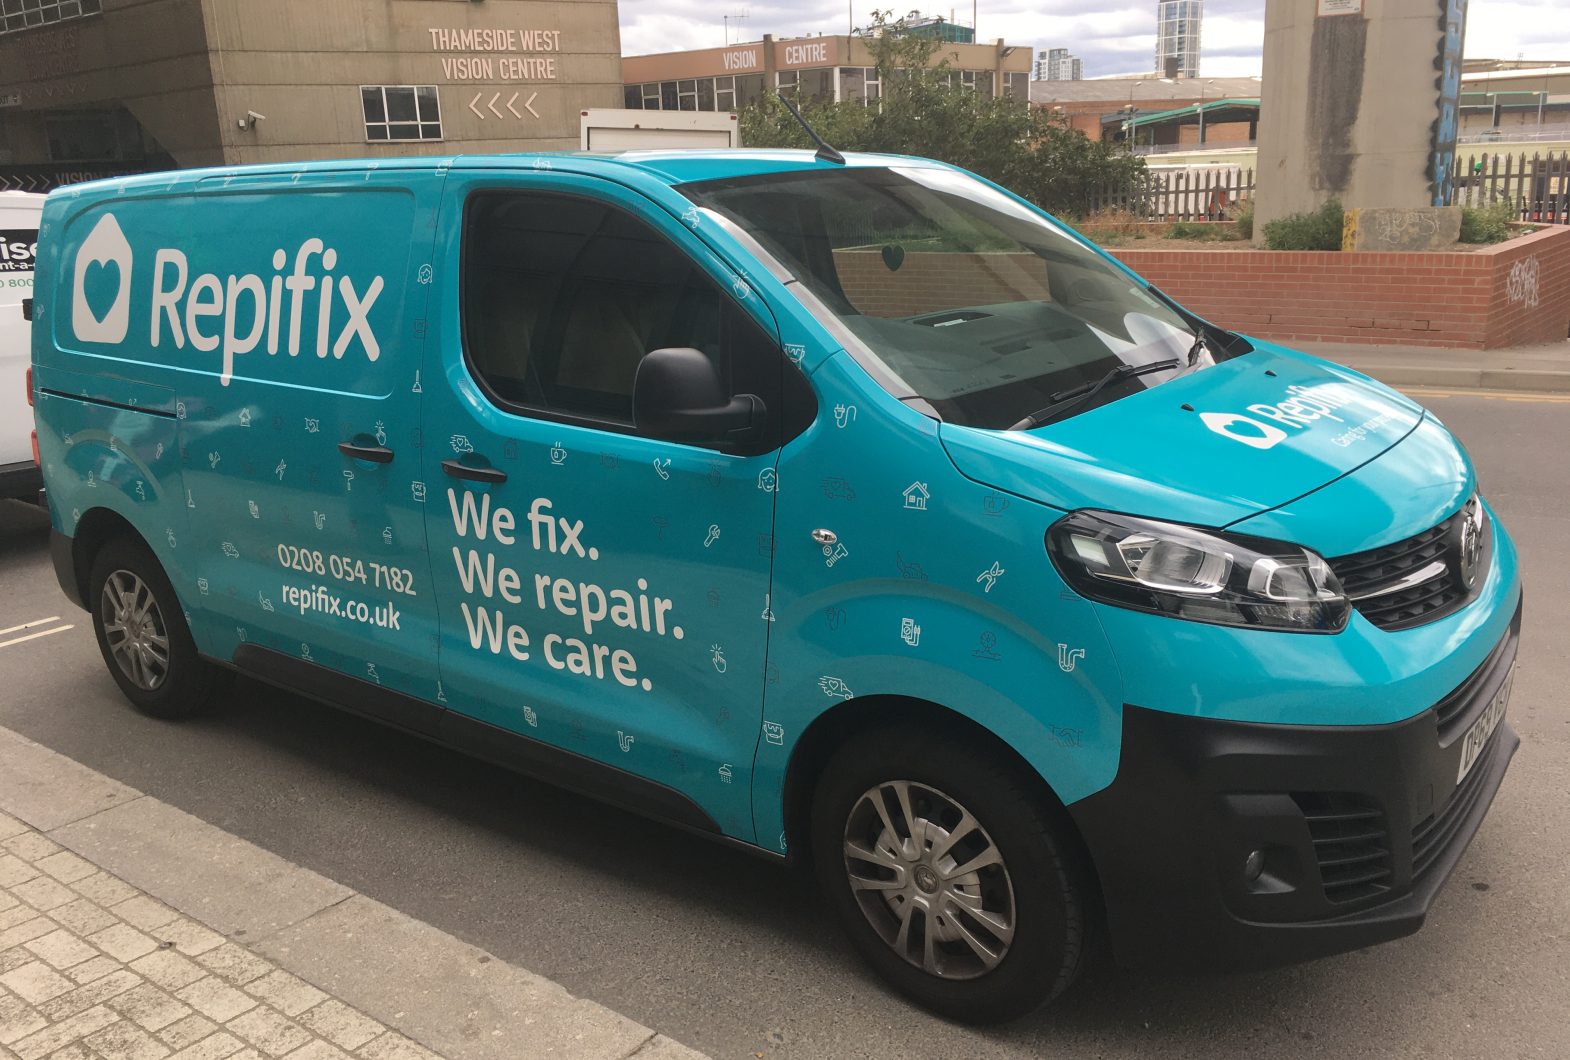 Repifix vehicle livery in new branding